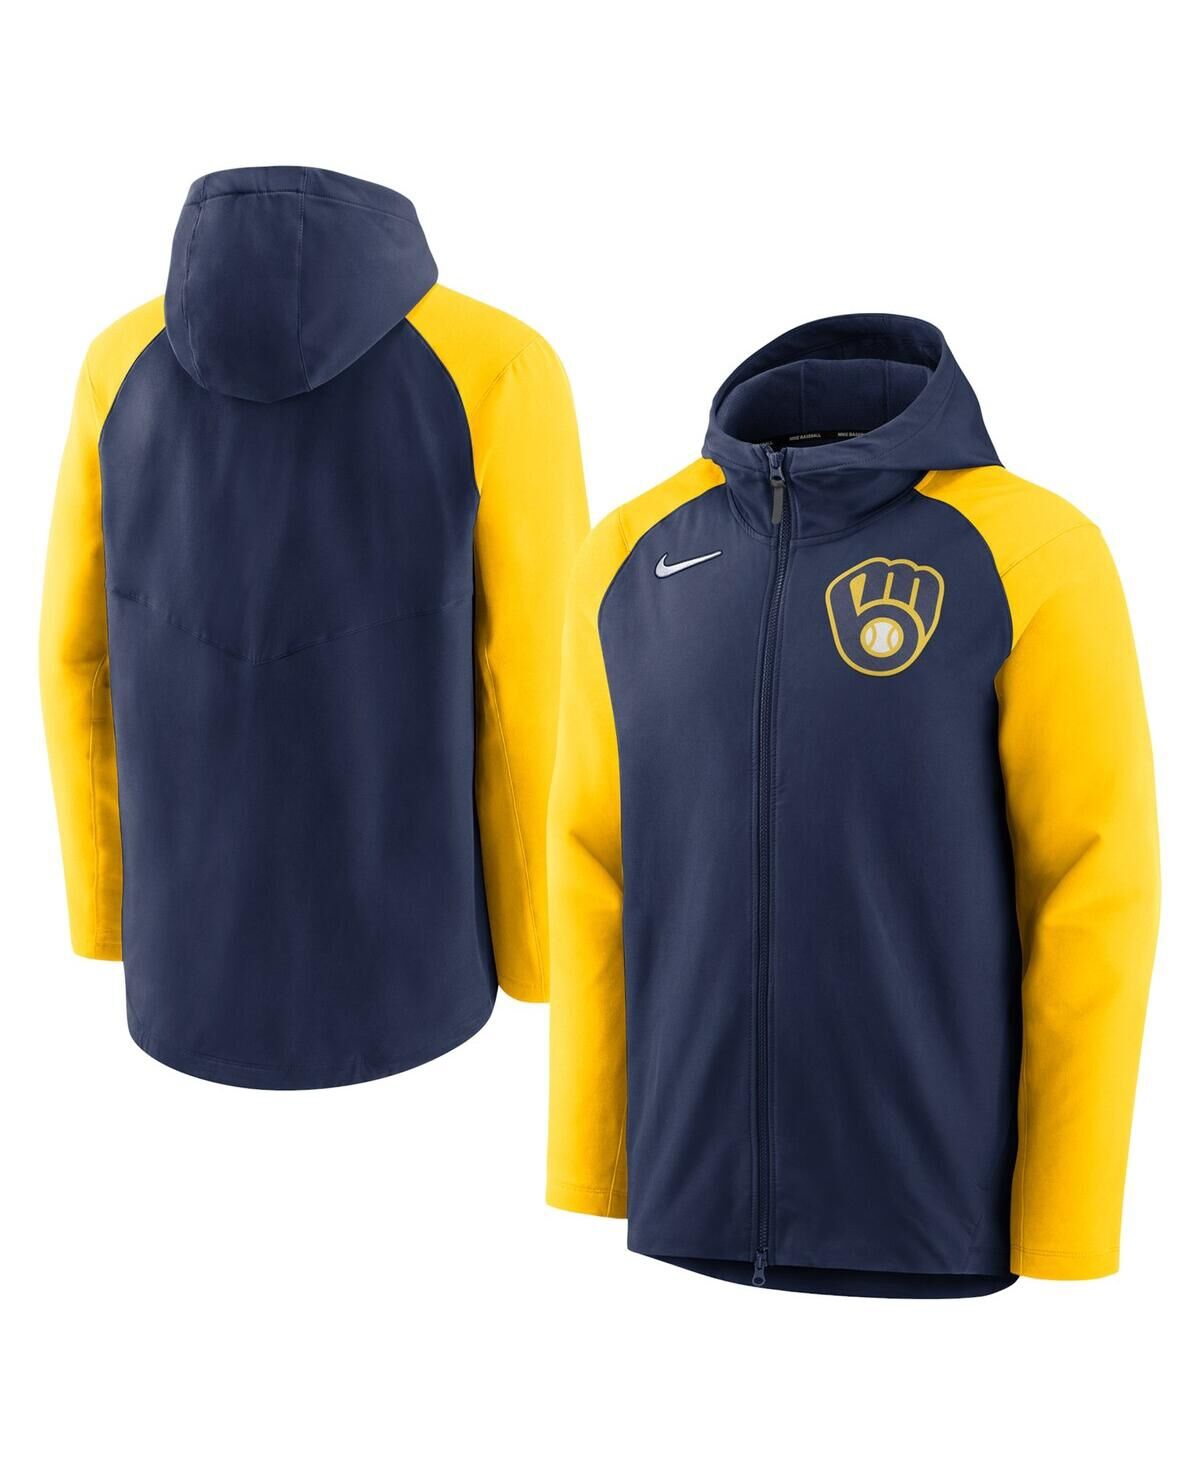 Nike Men's Nike Navy and Gold Milwaukee Brewers Authentic Collection Full-Zip Hoodie Performance Jacket - Navy, Gold